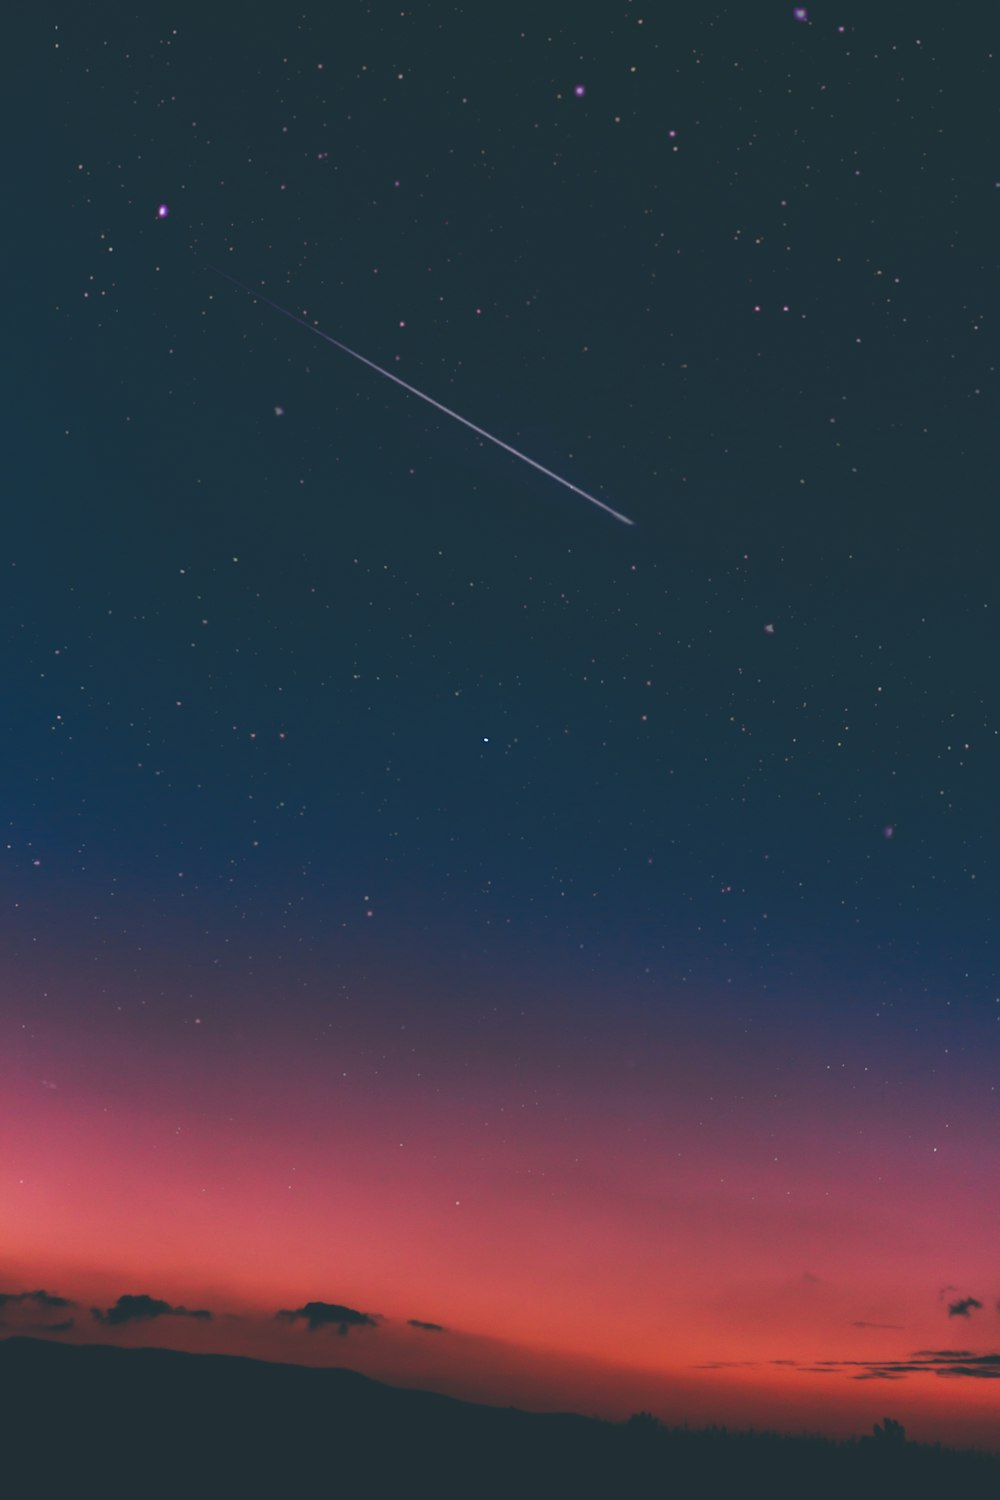 100+ Shooting Star Pictures  Download Free Images on Unsplash